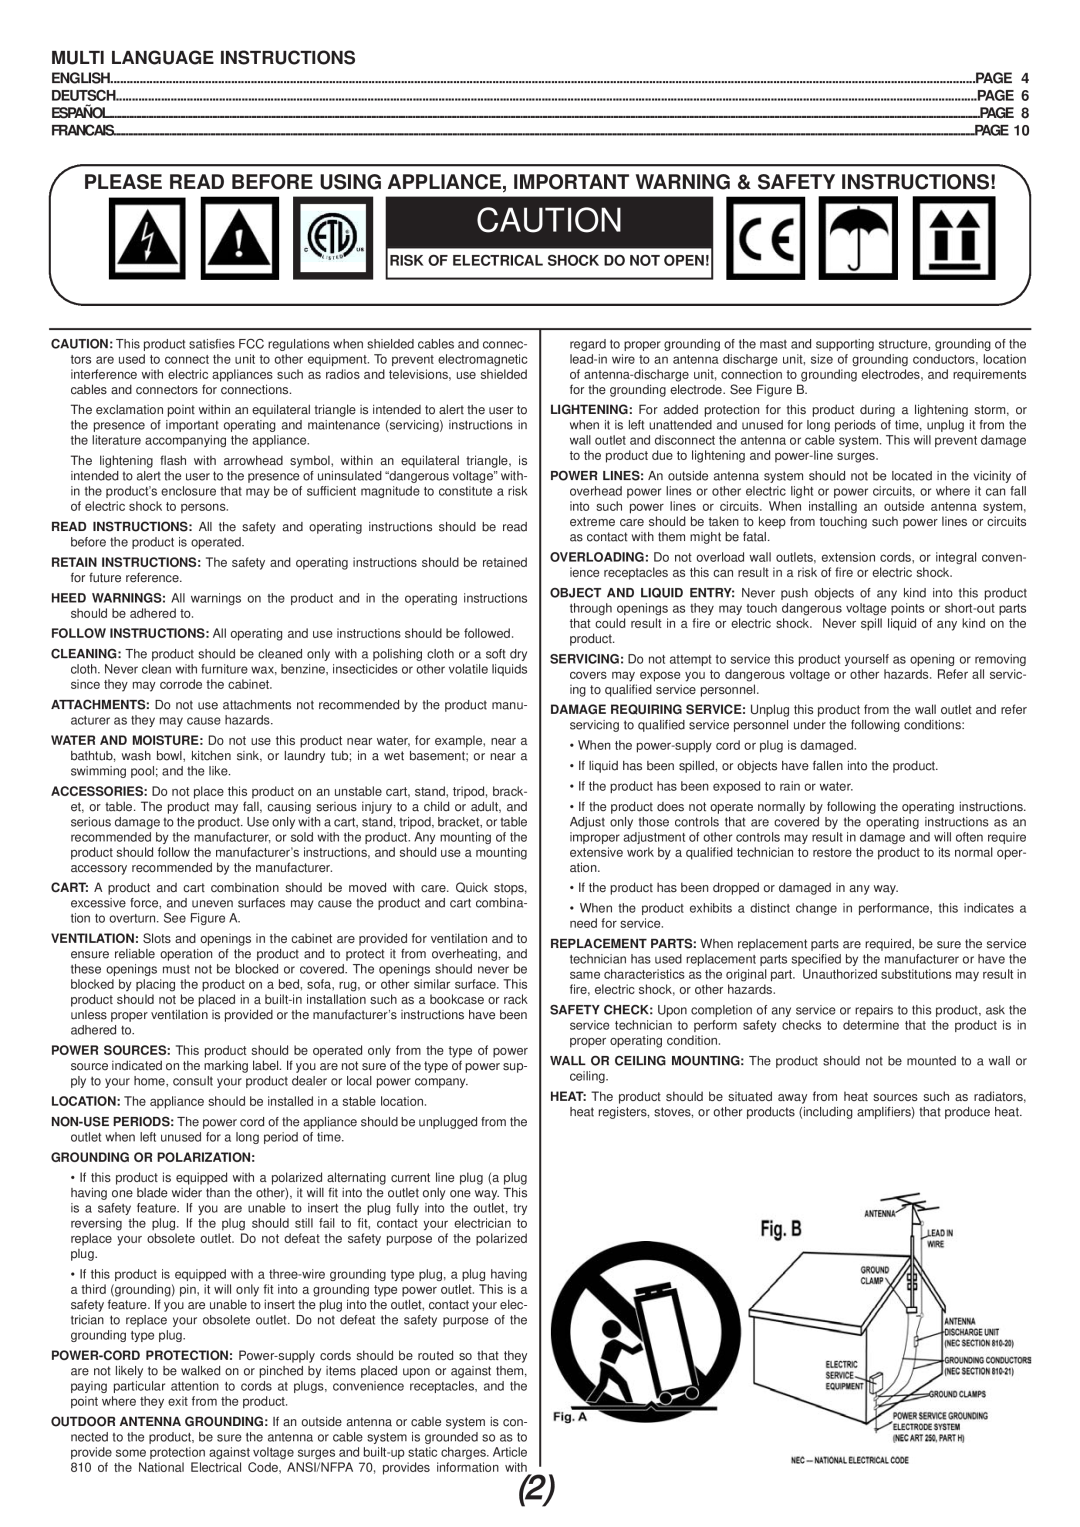 Gemini CDX-01 manual Multi Language Instructions, Page, Risk Of Electrical Shock Do Not Open, Grounding Or Polarization 